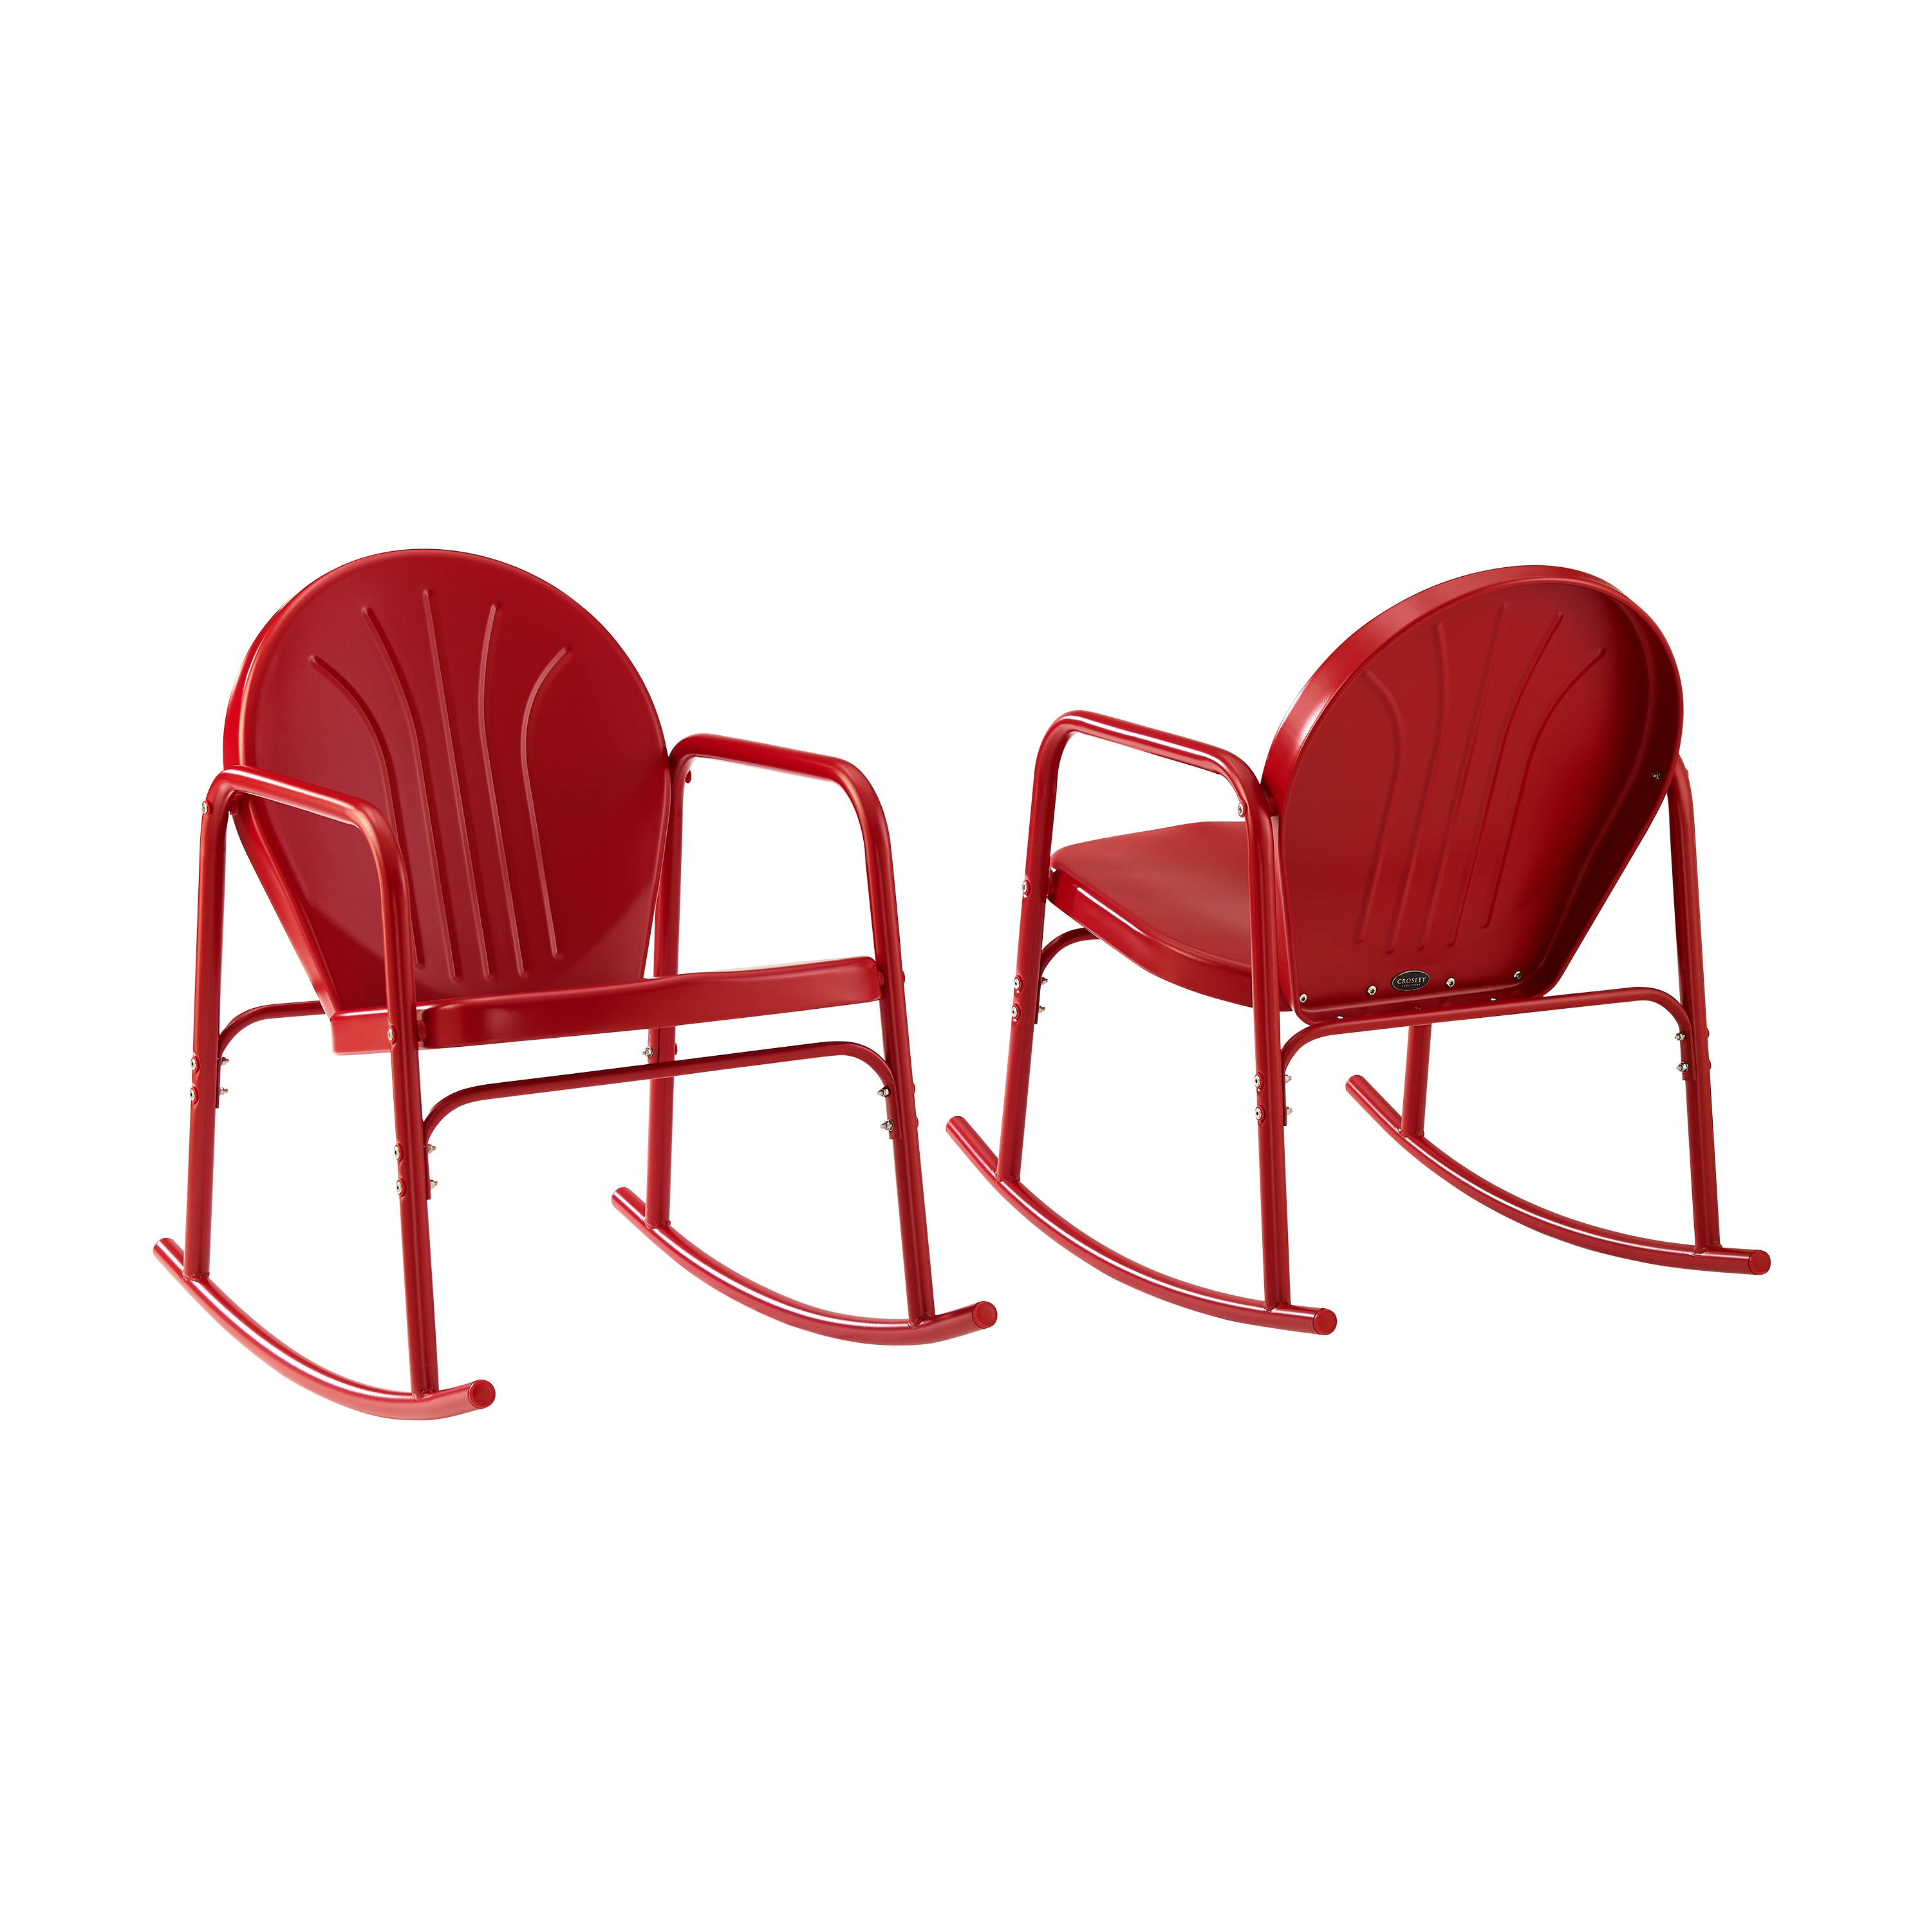 Crosley Furniture Griffith Metal Rocking Chair in Bright Red Gloss (Set of 2) - image 5 of 13